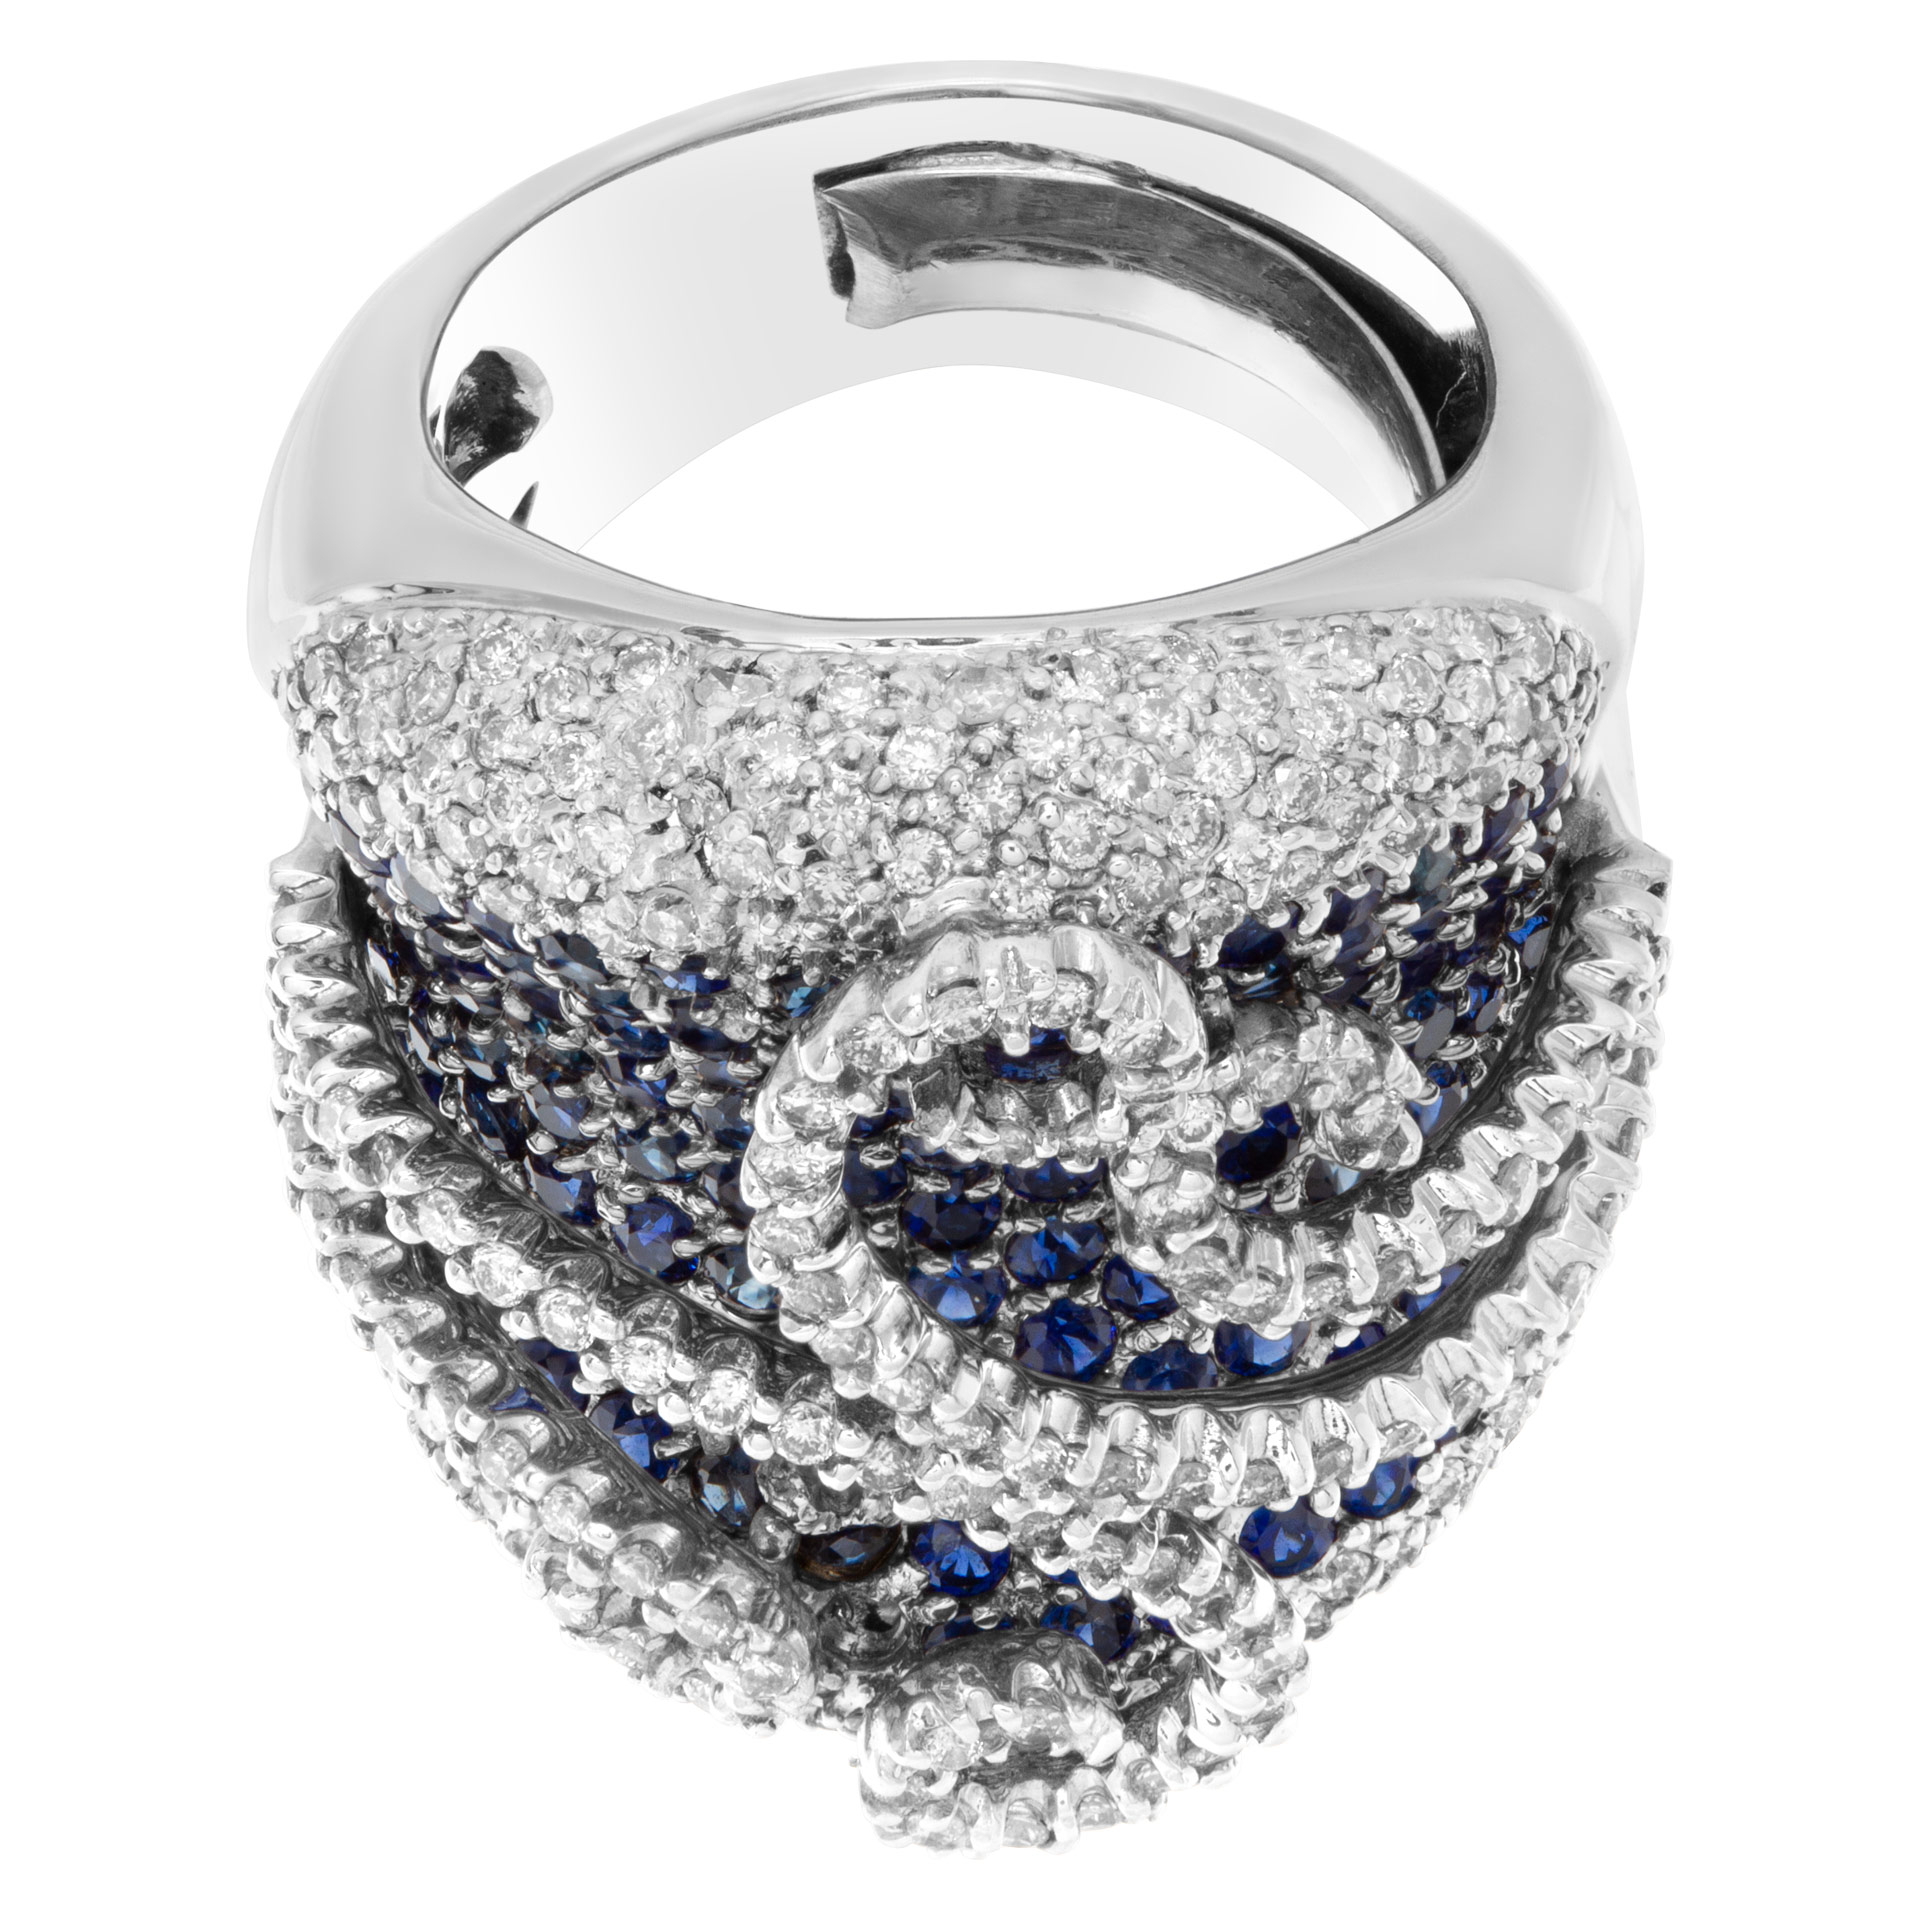 Wide pave diamonds & pave sapphire ring set in 18K white gold. image 3